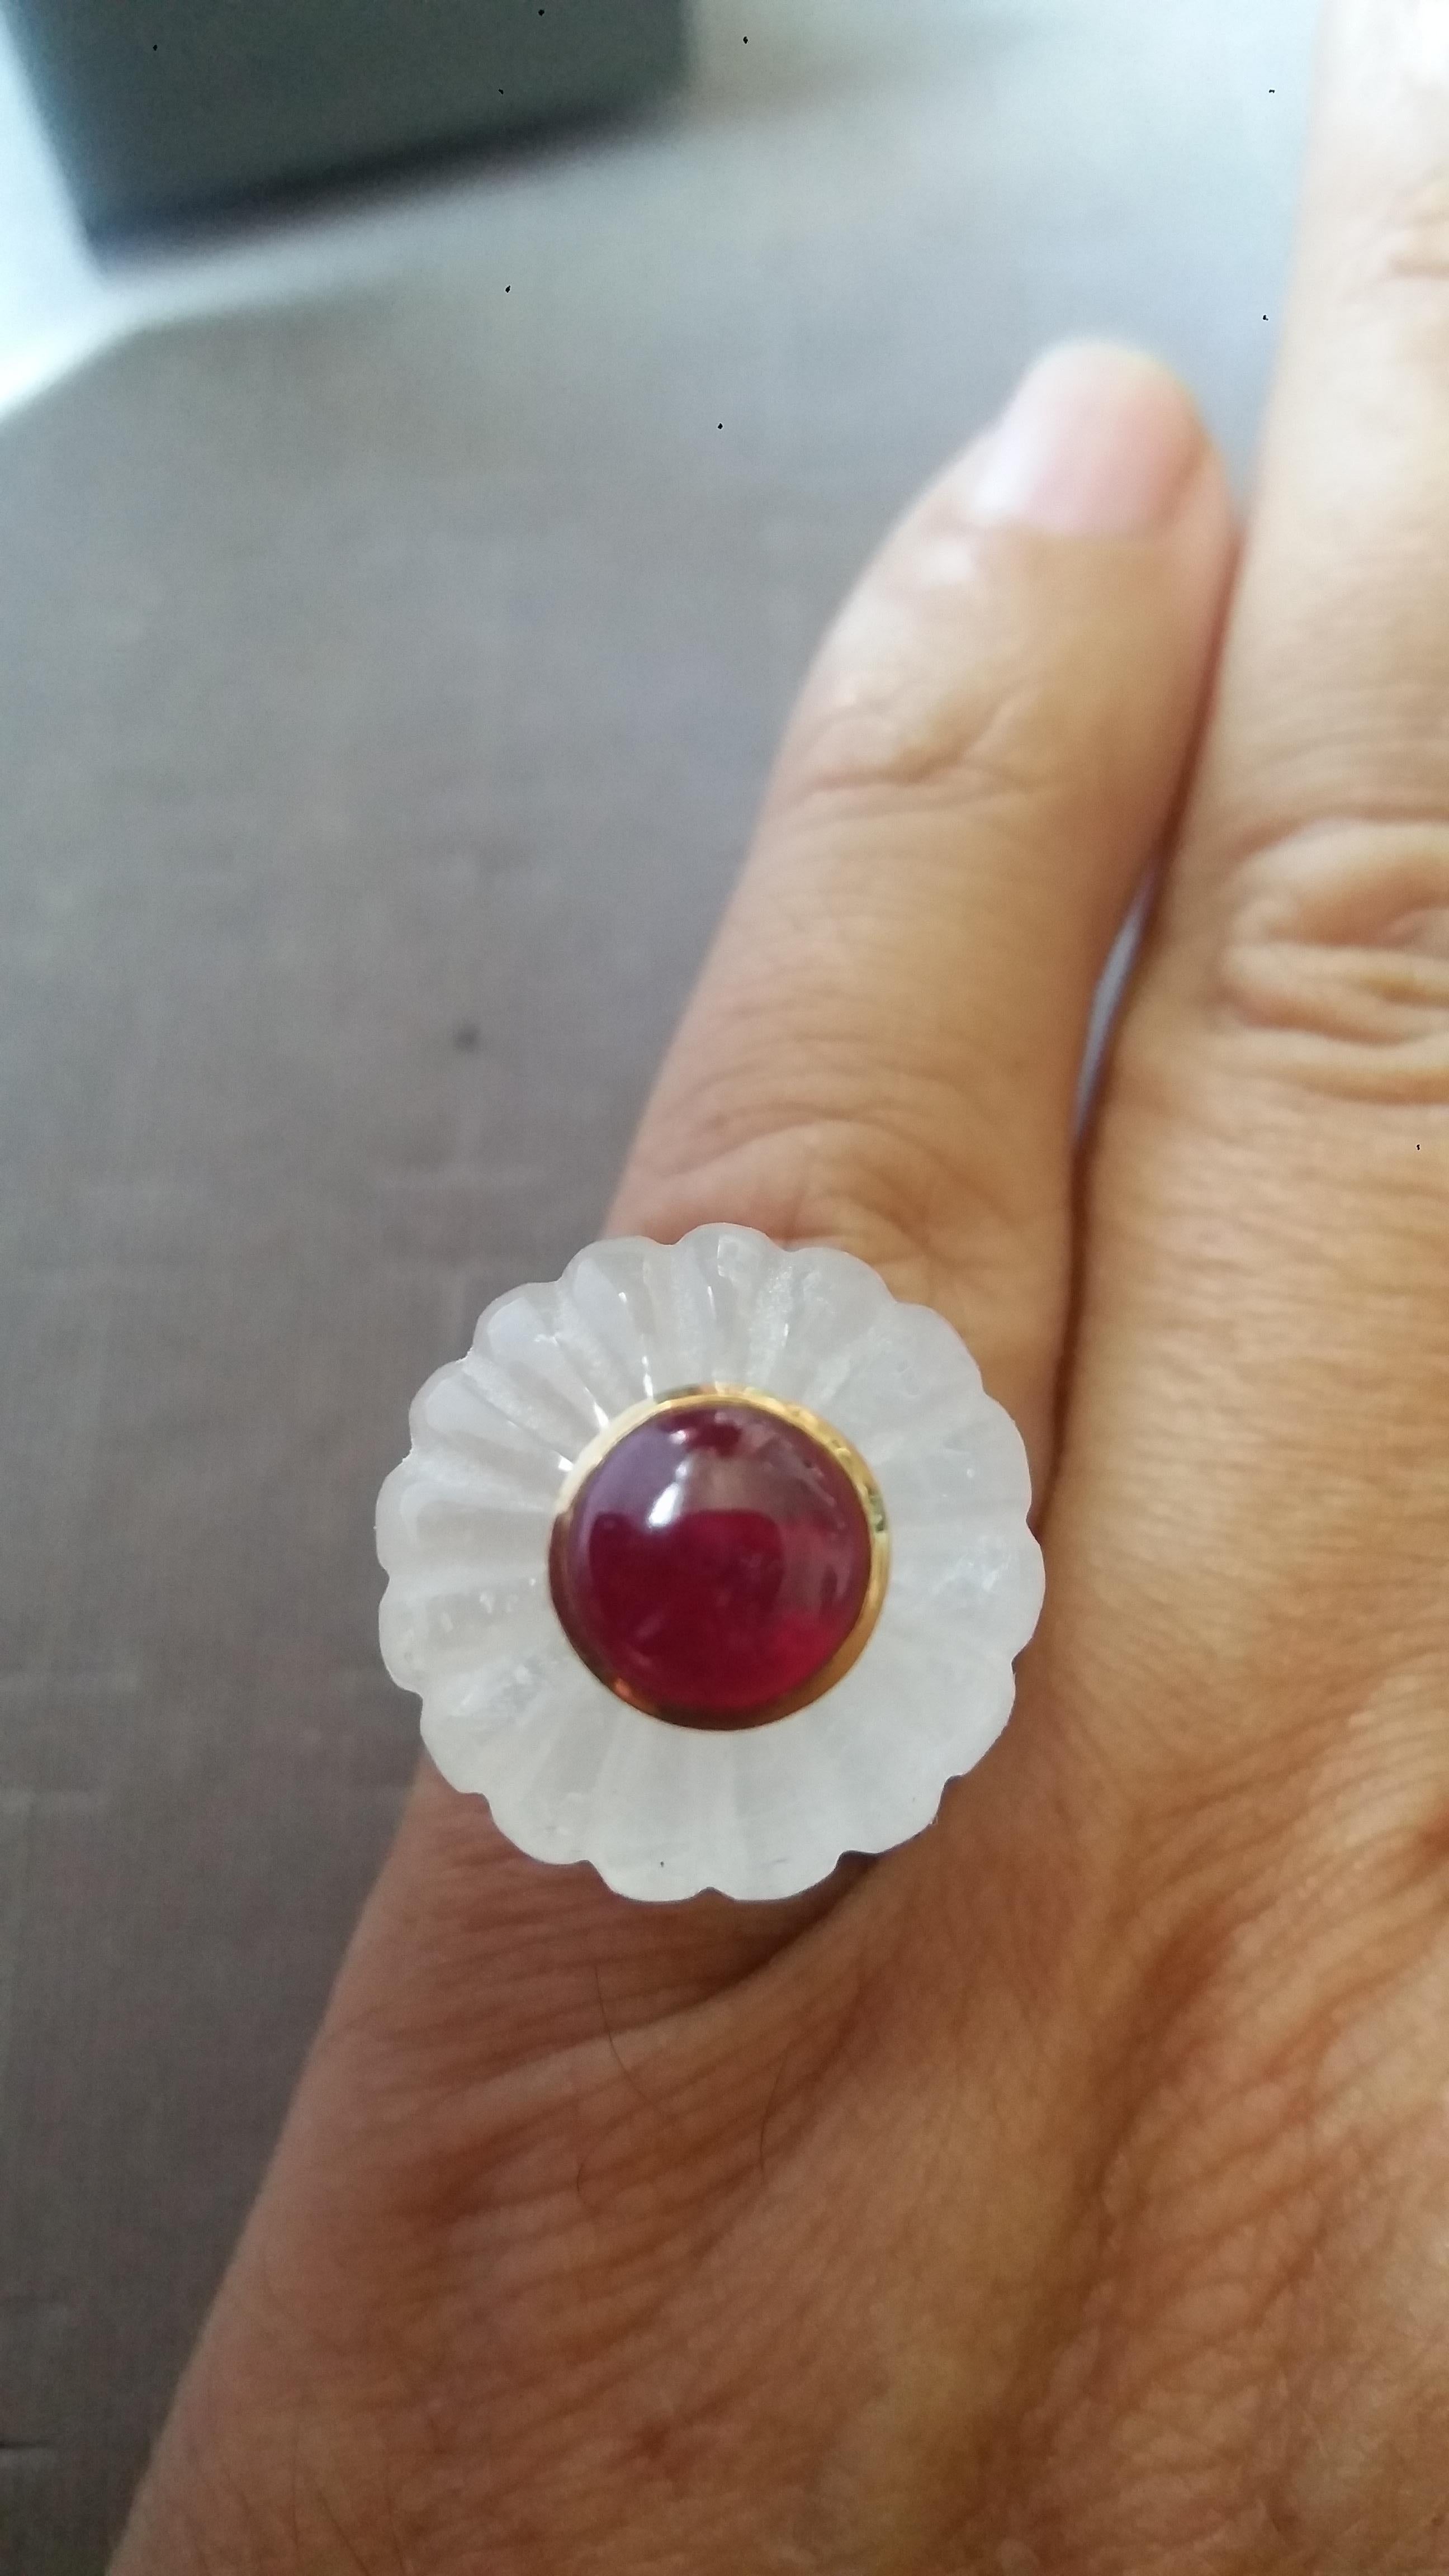 Melon cut Rock Quartz Round Bead of 20 mm. in diameter and 16 mm. thick with in the center a round Ruby cabochon of 8 mm. in diameter set in 14 kt yellow gold is mounted on top of a 14 Kt. yellow gold shank ( actual size #7, but can resize according